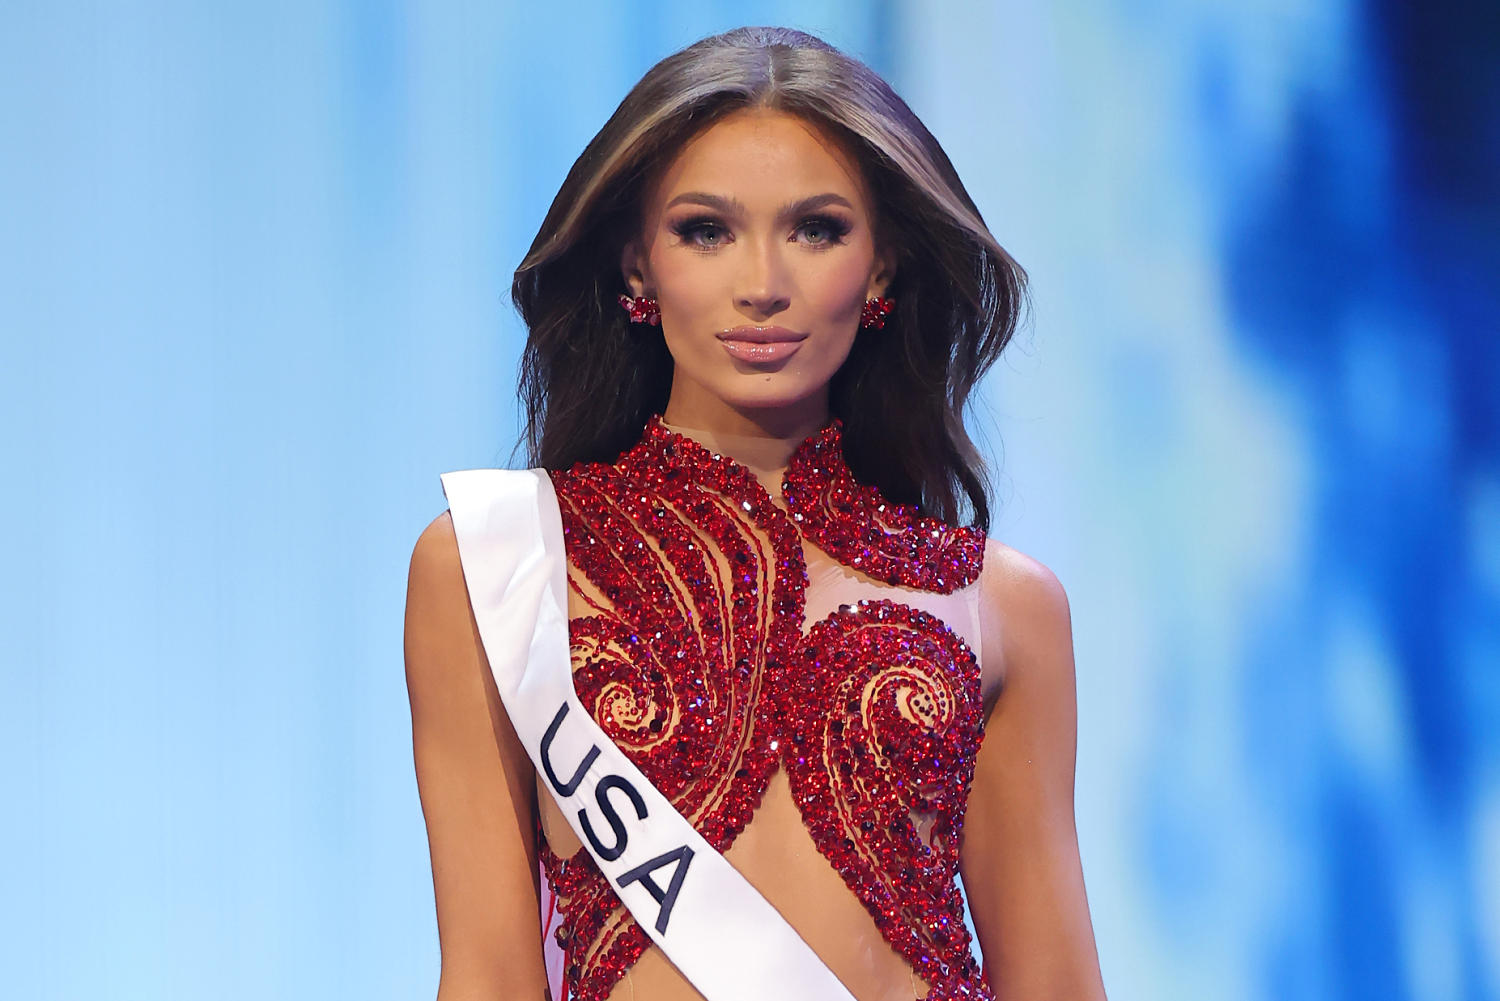 Miss USA's resignation letter accuses the organization of toxic work culture